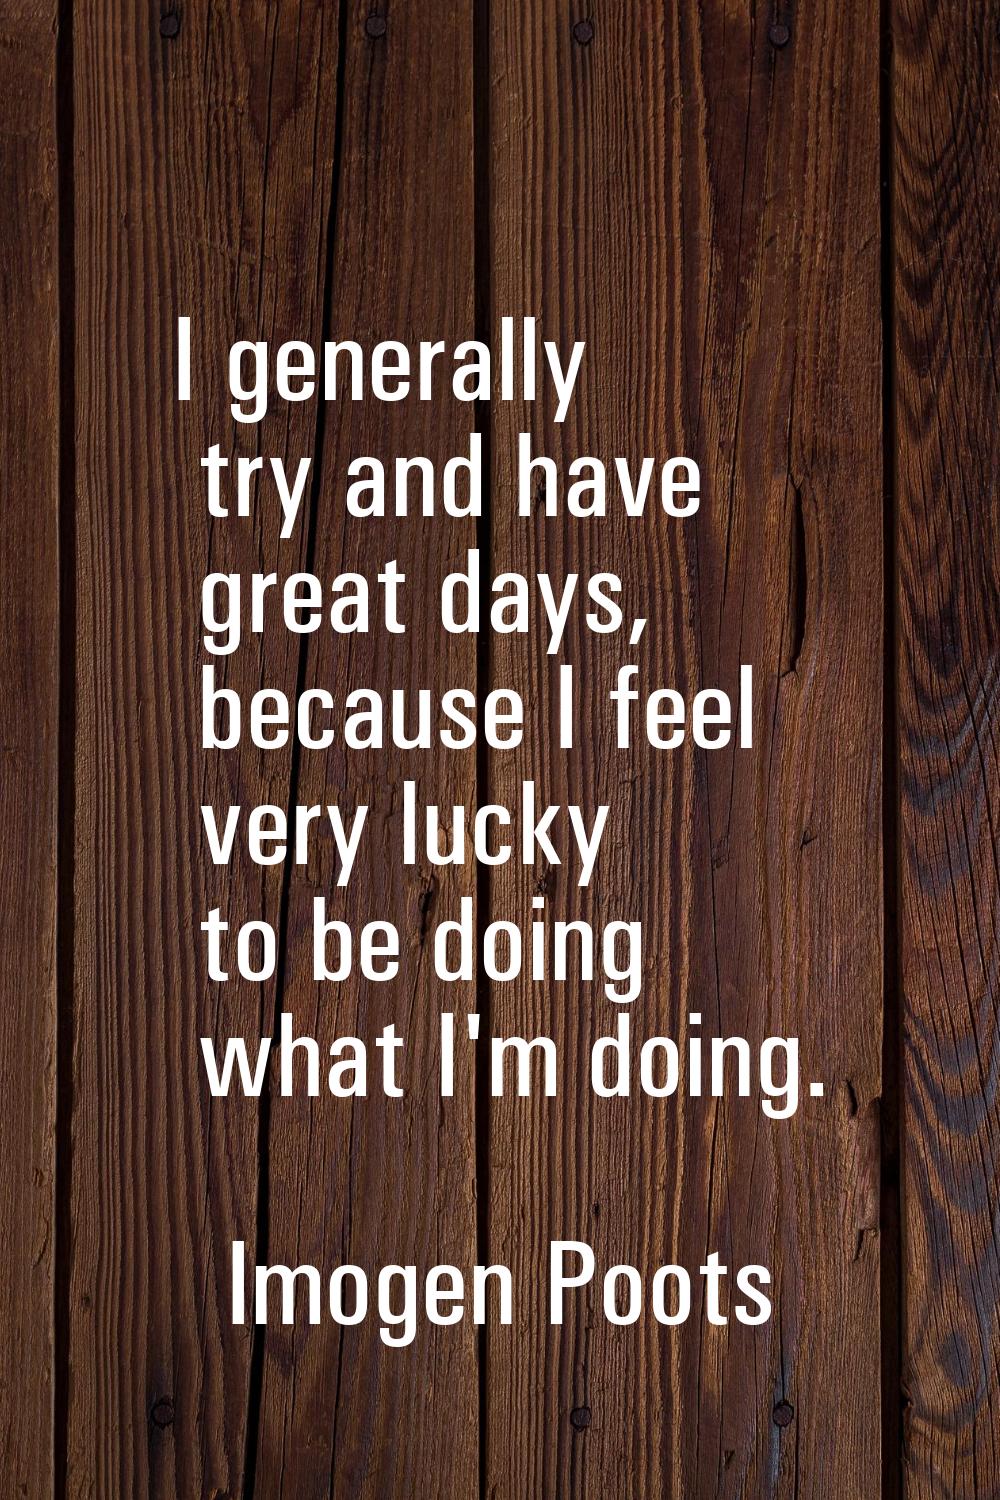 I generally try and have great days, because I feel very lucky to be doing what I'm doing.